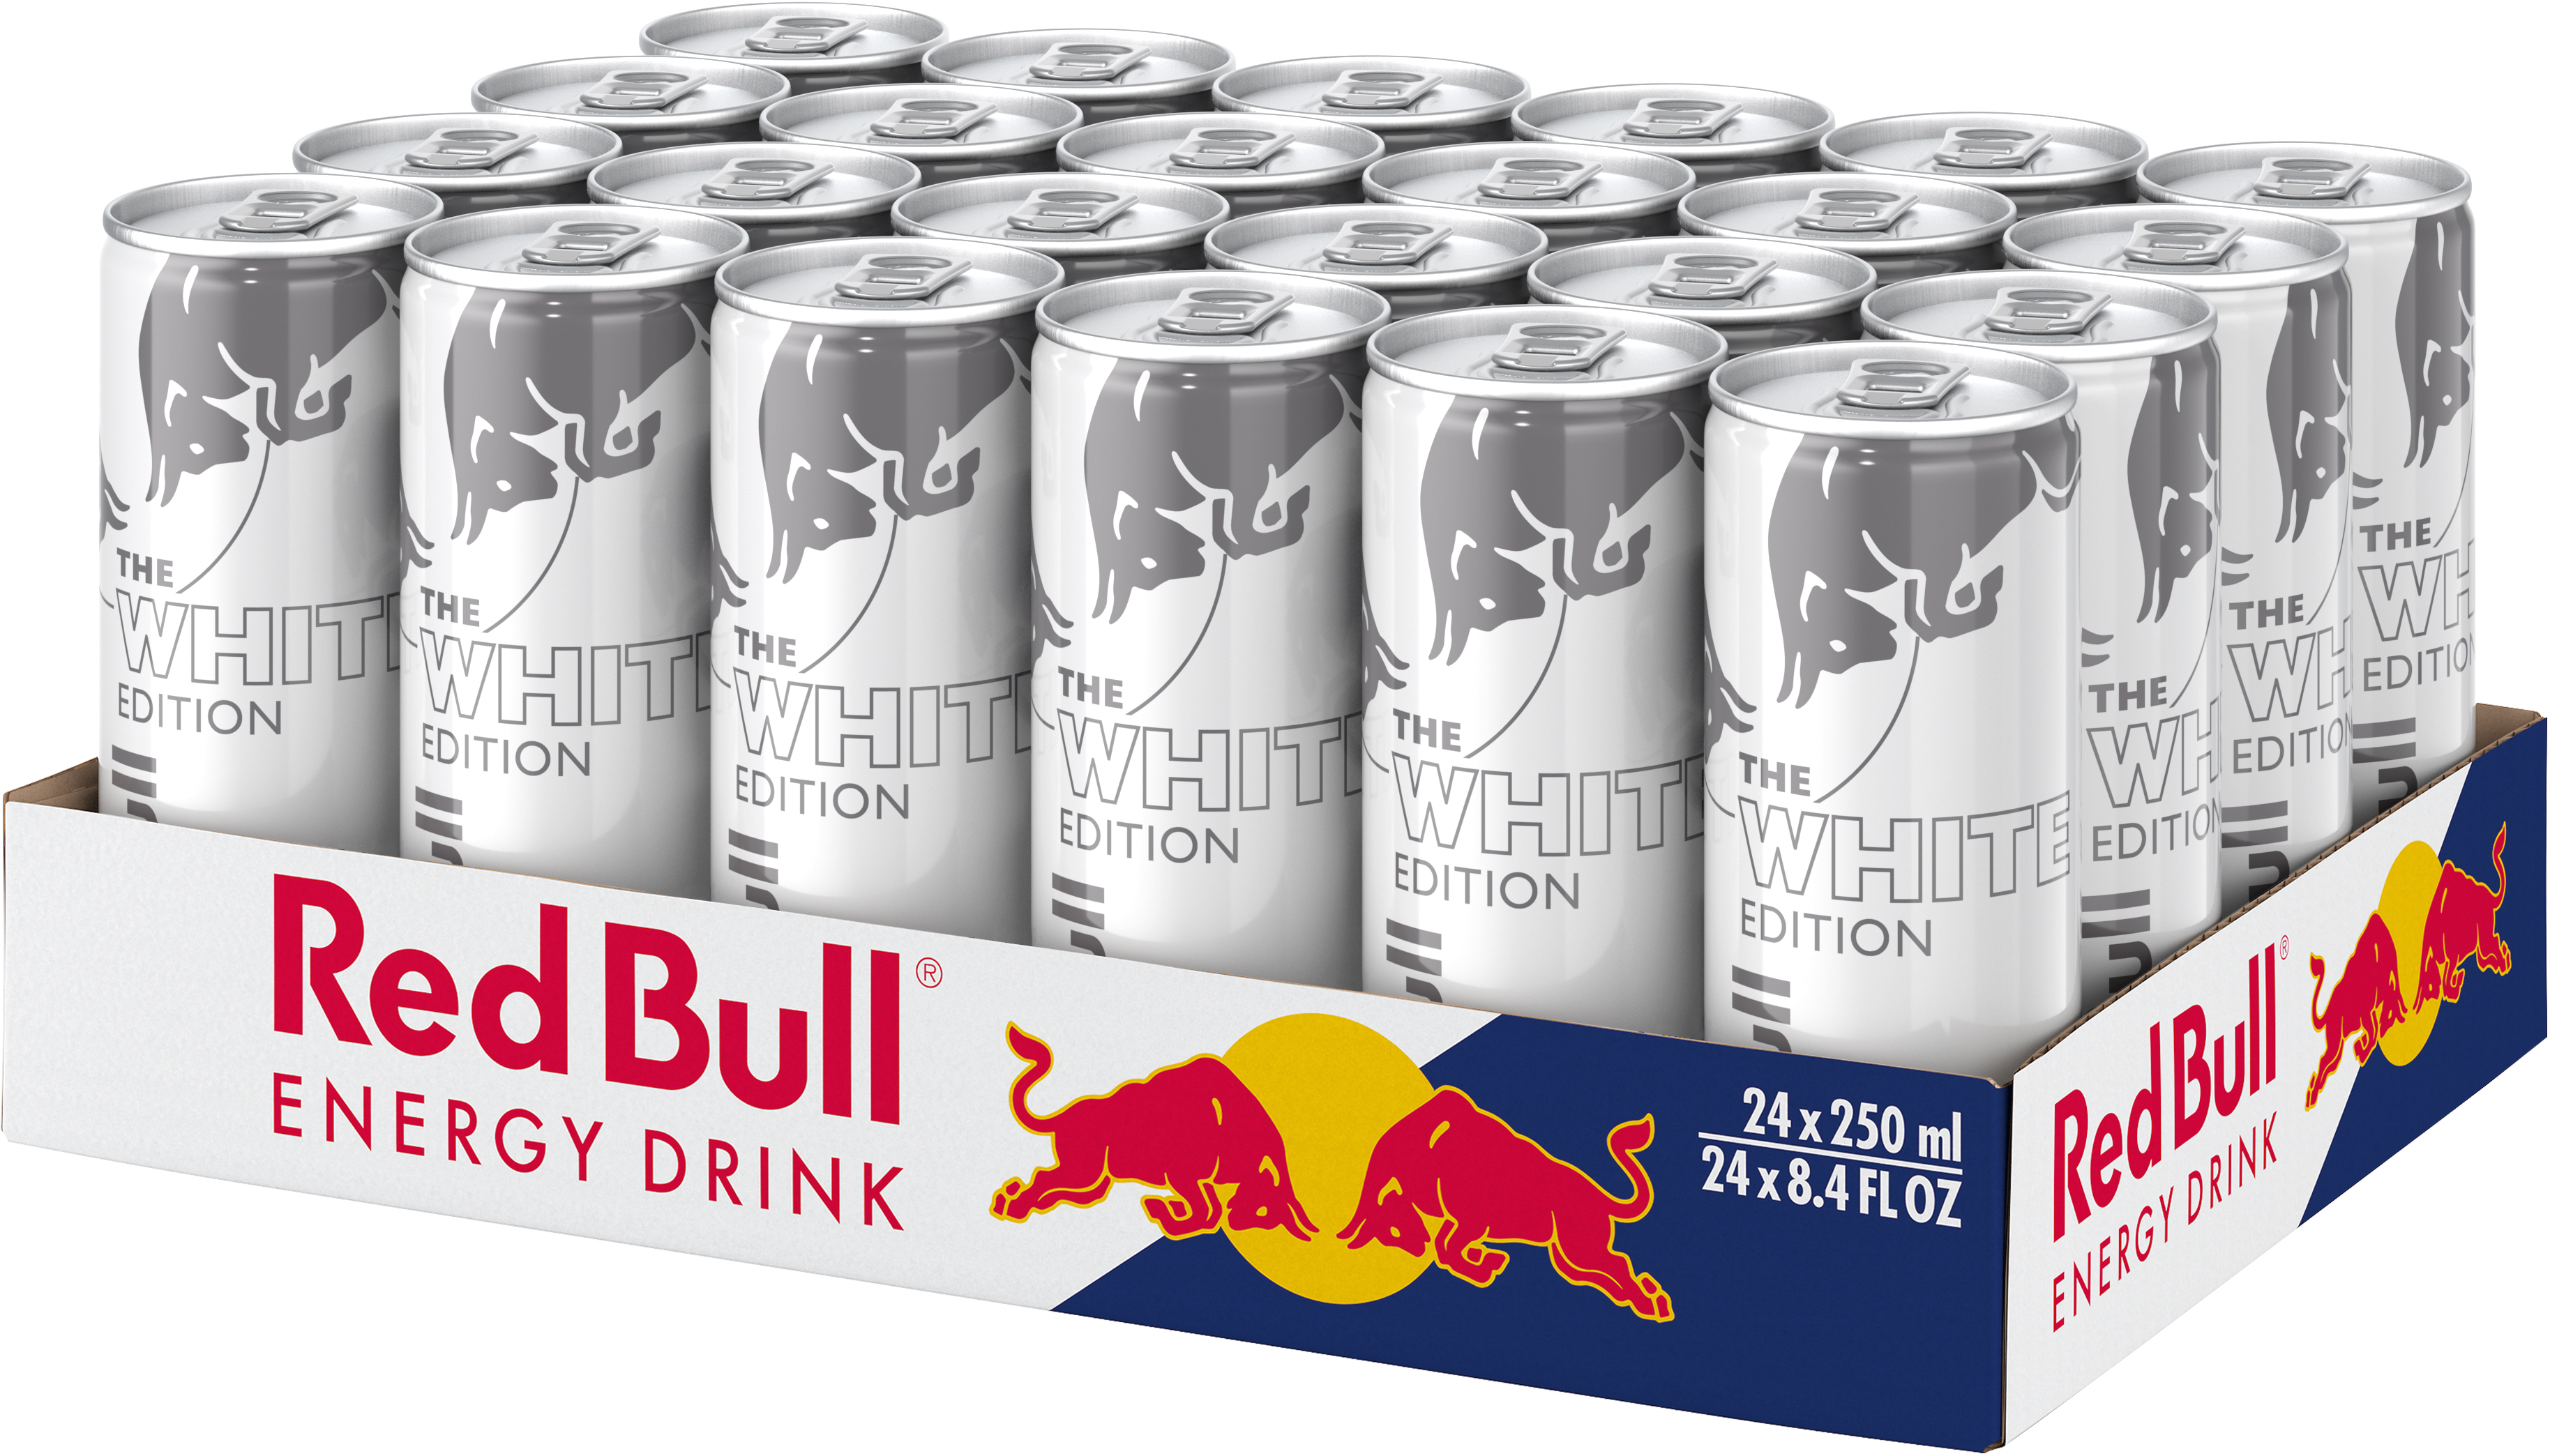 RED BULL Energy Drink Alu 4255 White Edition 25 cl, 24 pcs. White Edition 25 cl, 24 pcs.